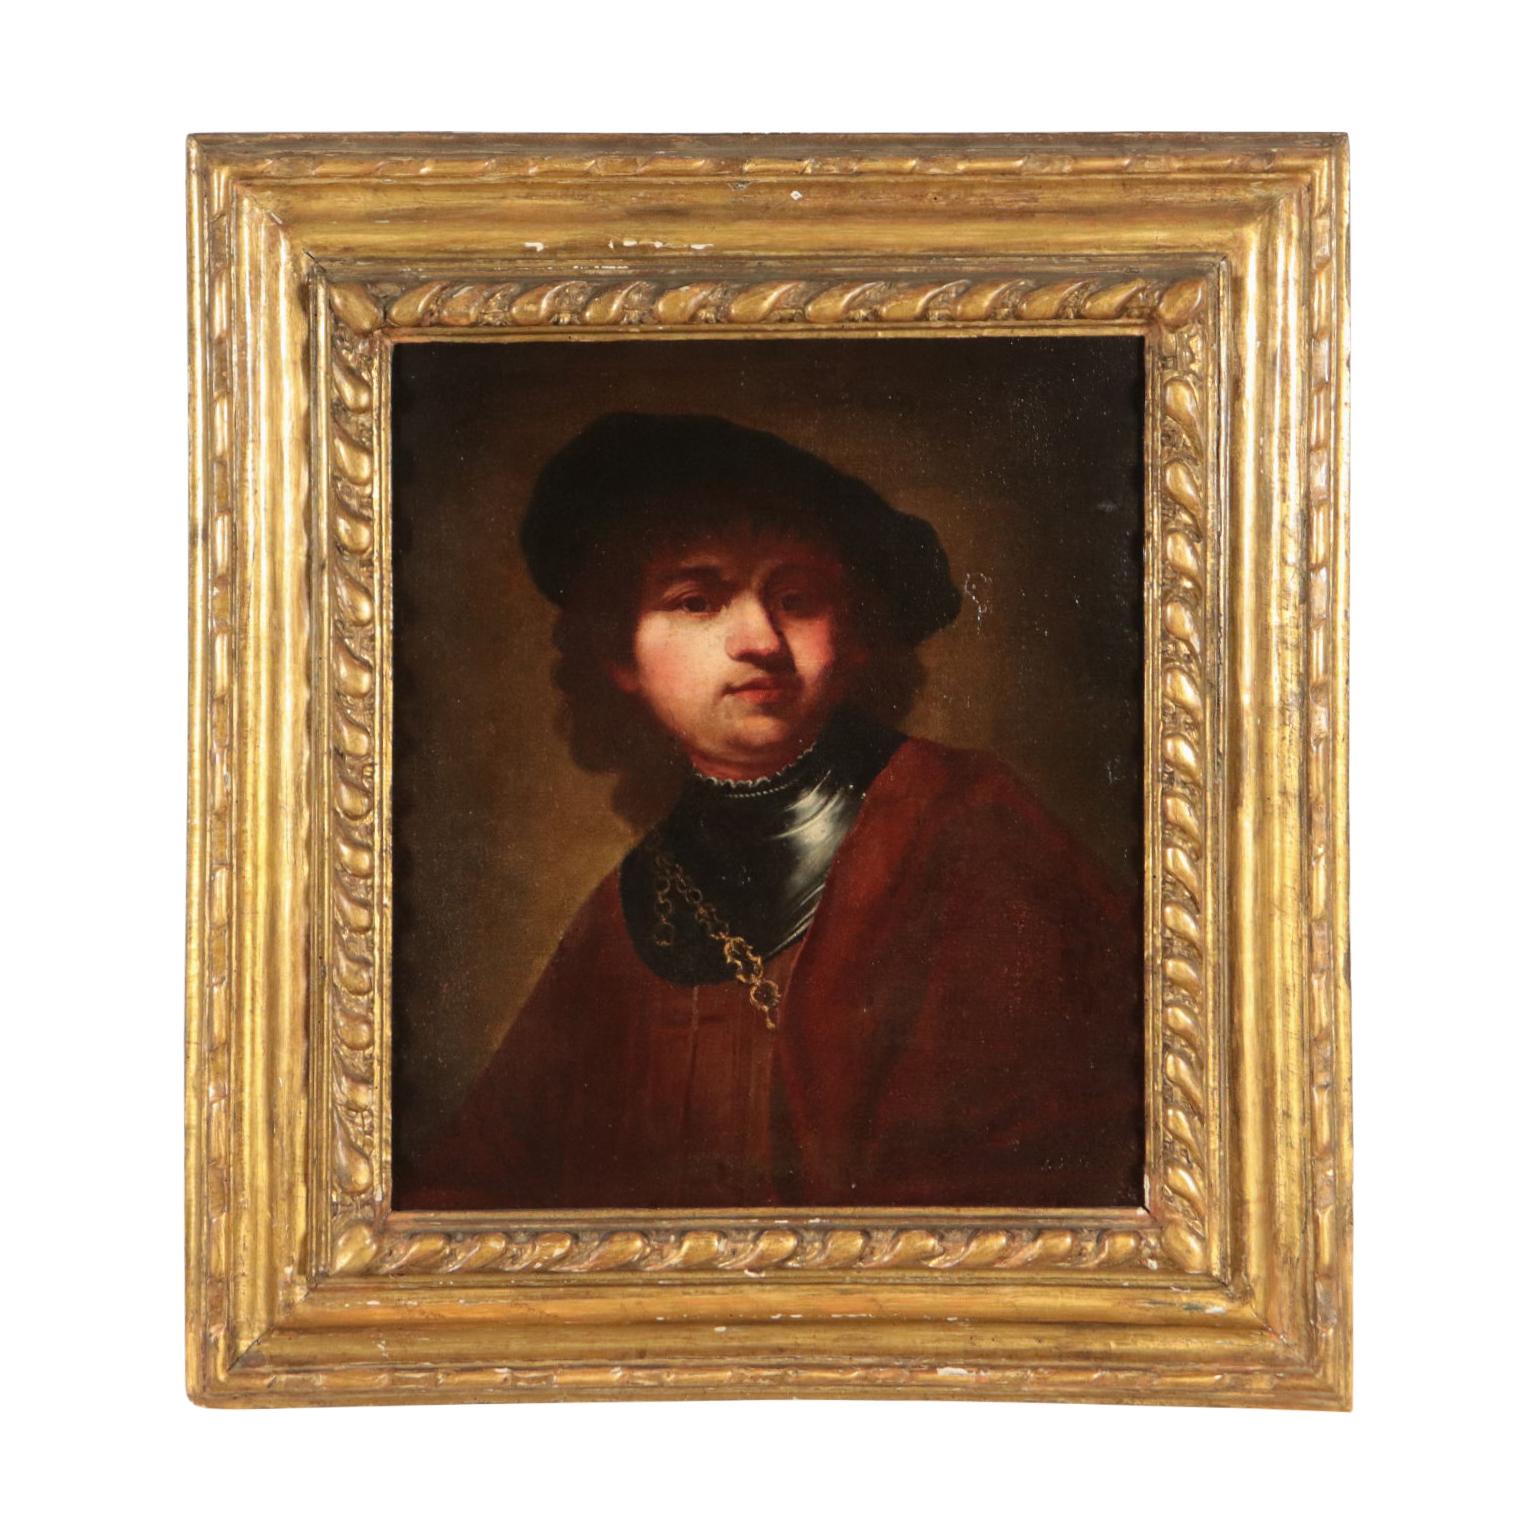 Unknown Portrait Painting - Self-Portrait of Young Rembrandt, Copy, Oil on Canvas, 17th Century